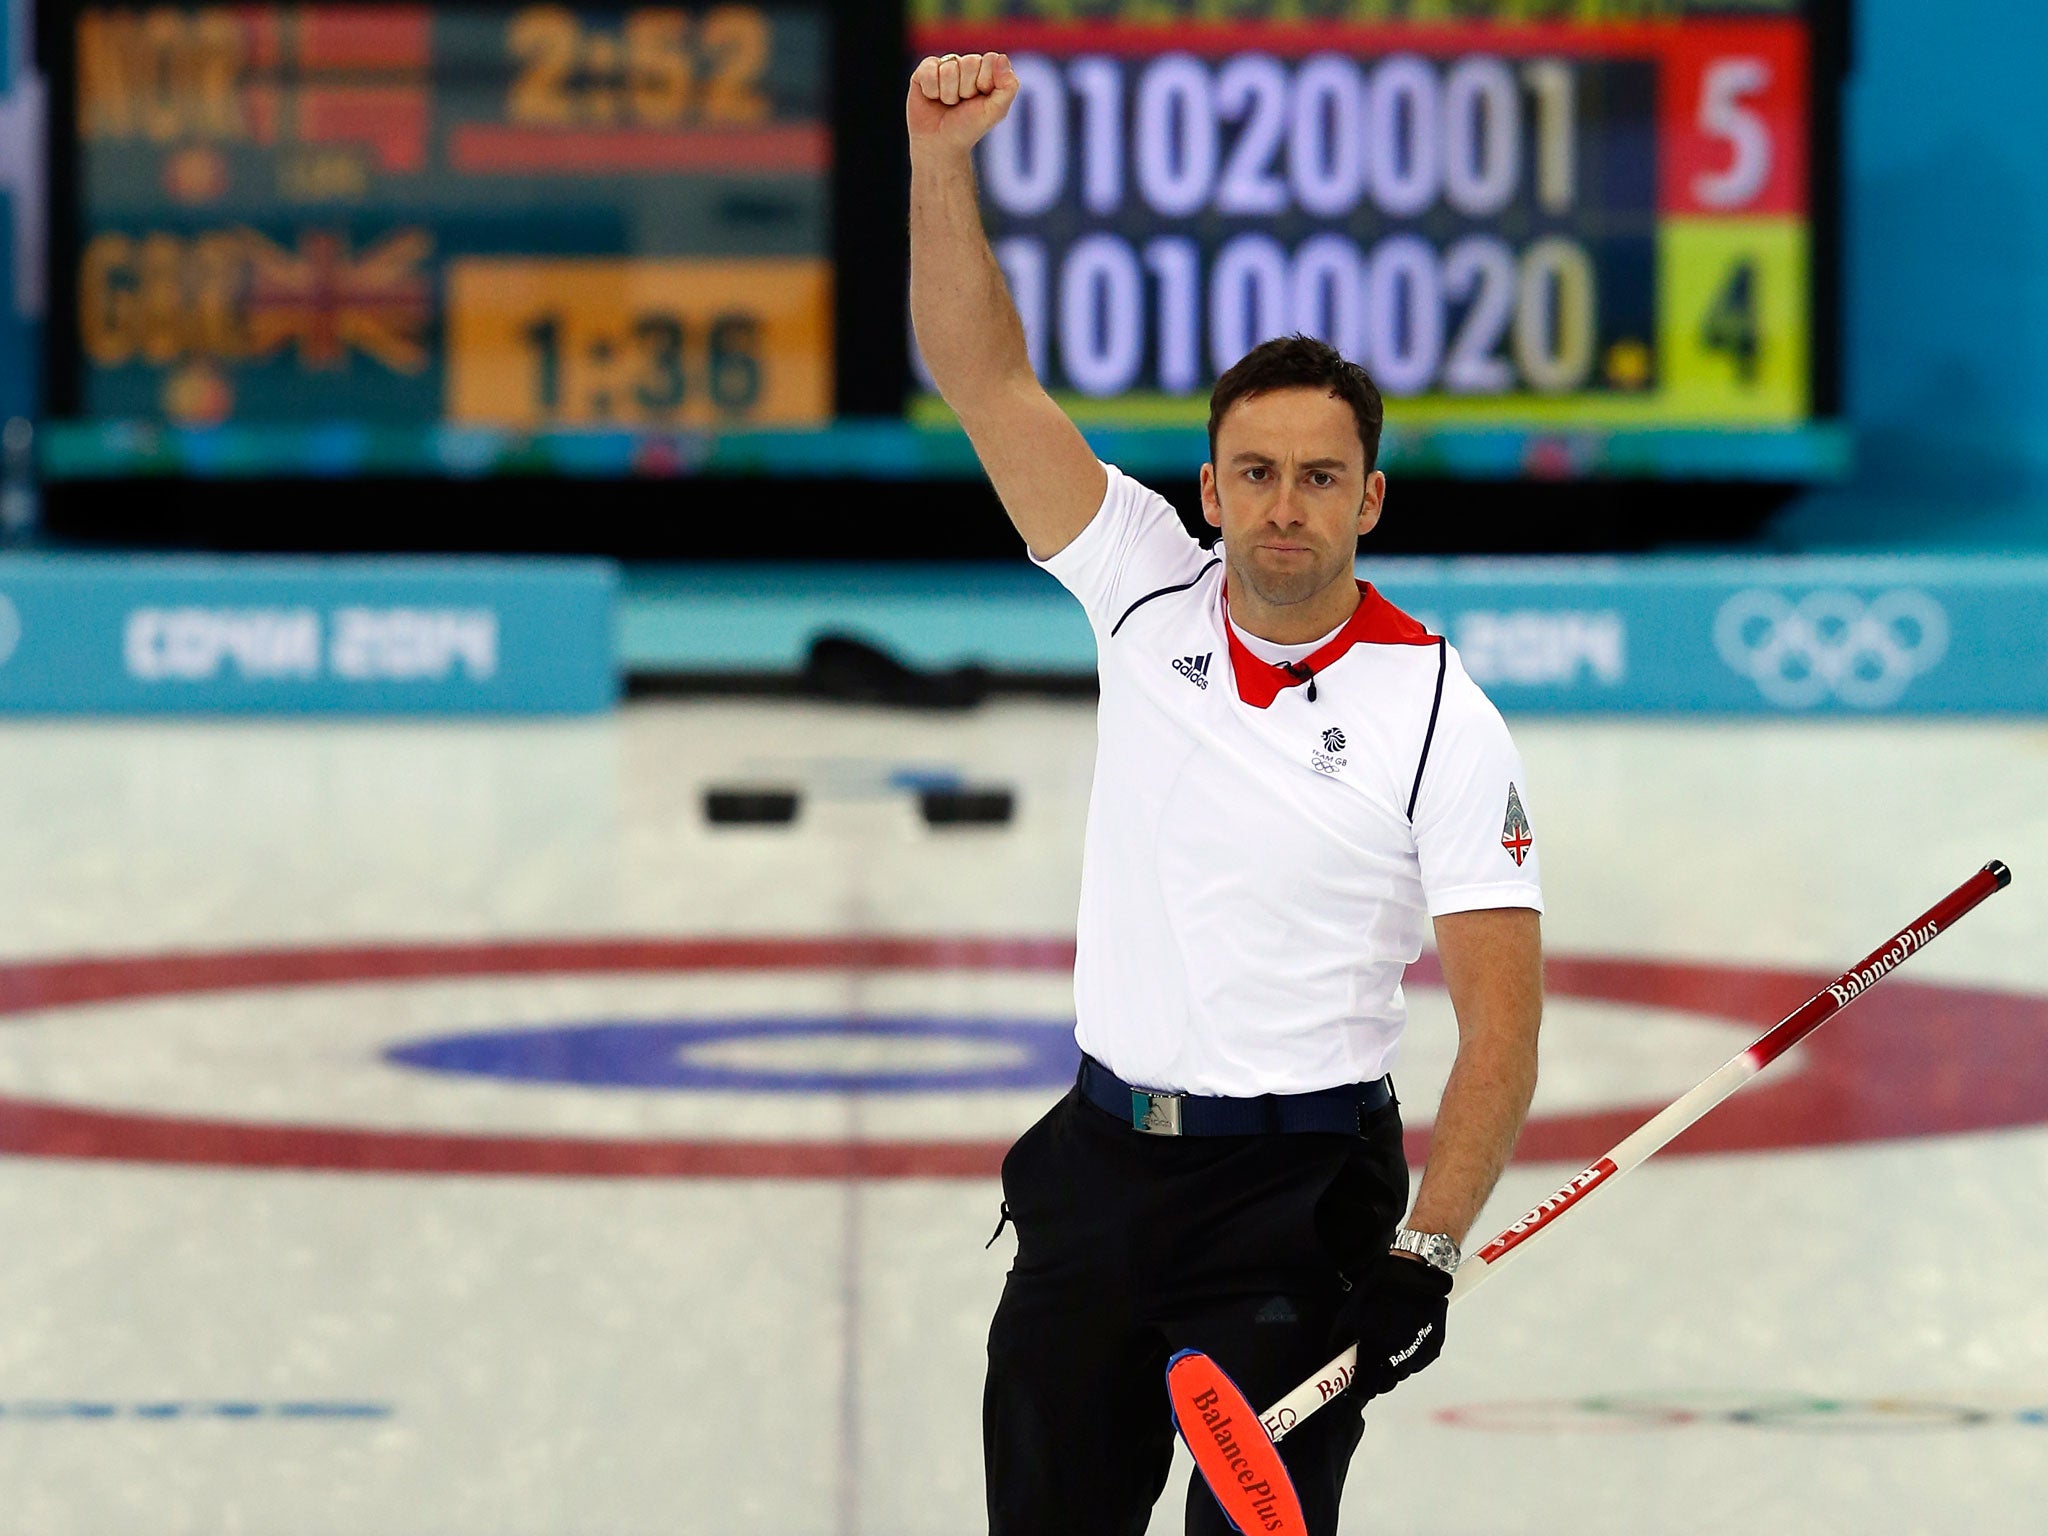 Team GB men's curling captain celebrates his two-point haul in the final end of their tie-break 6-5 victory over Norway